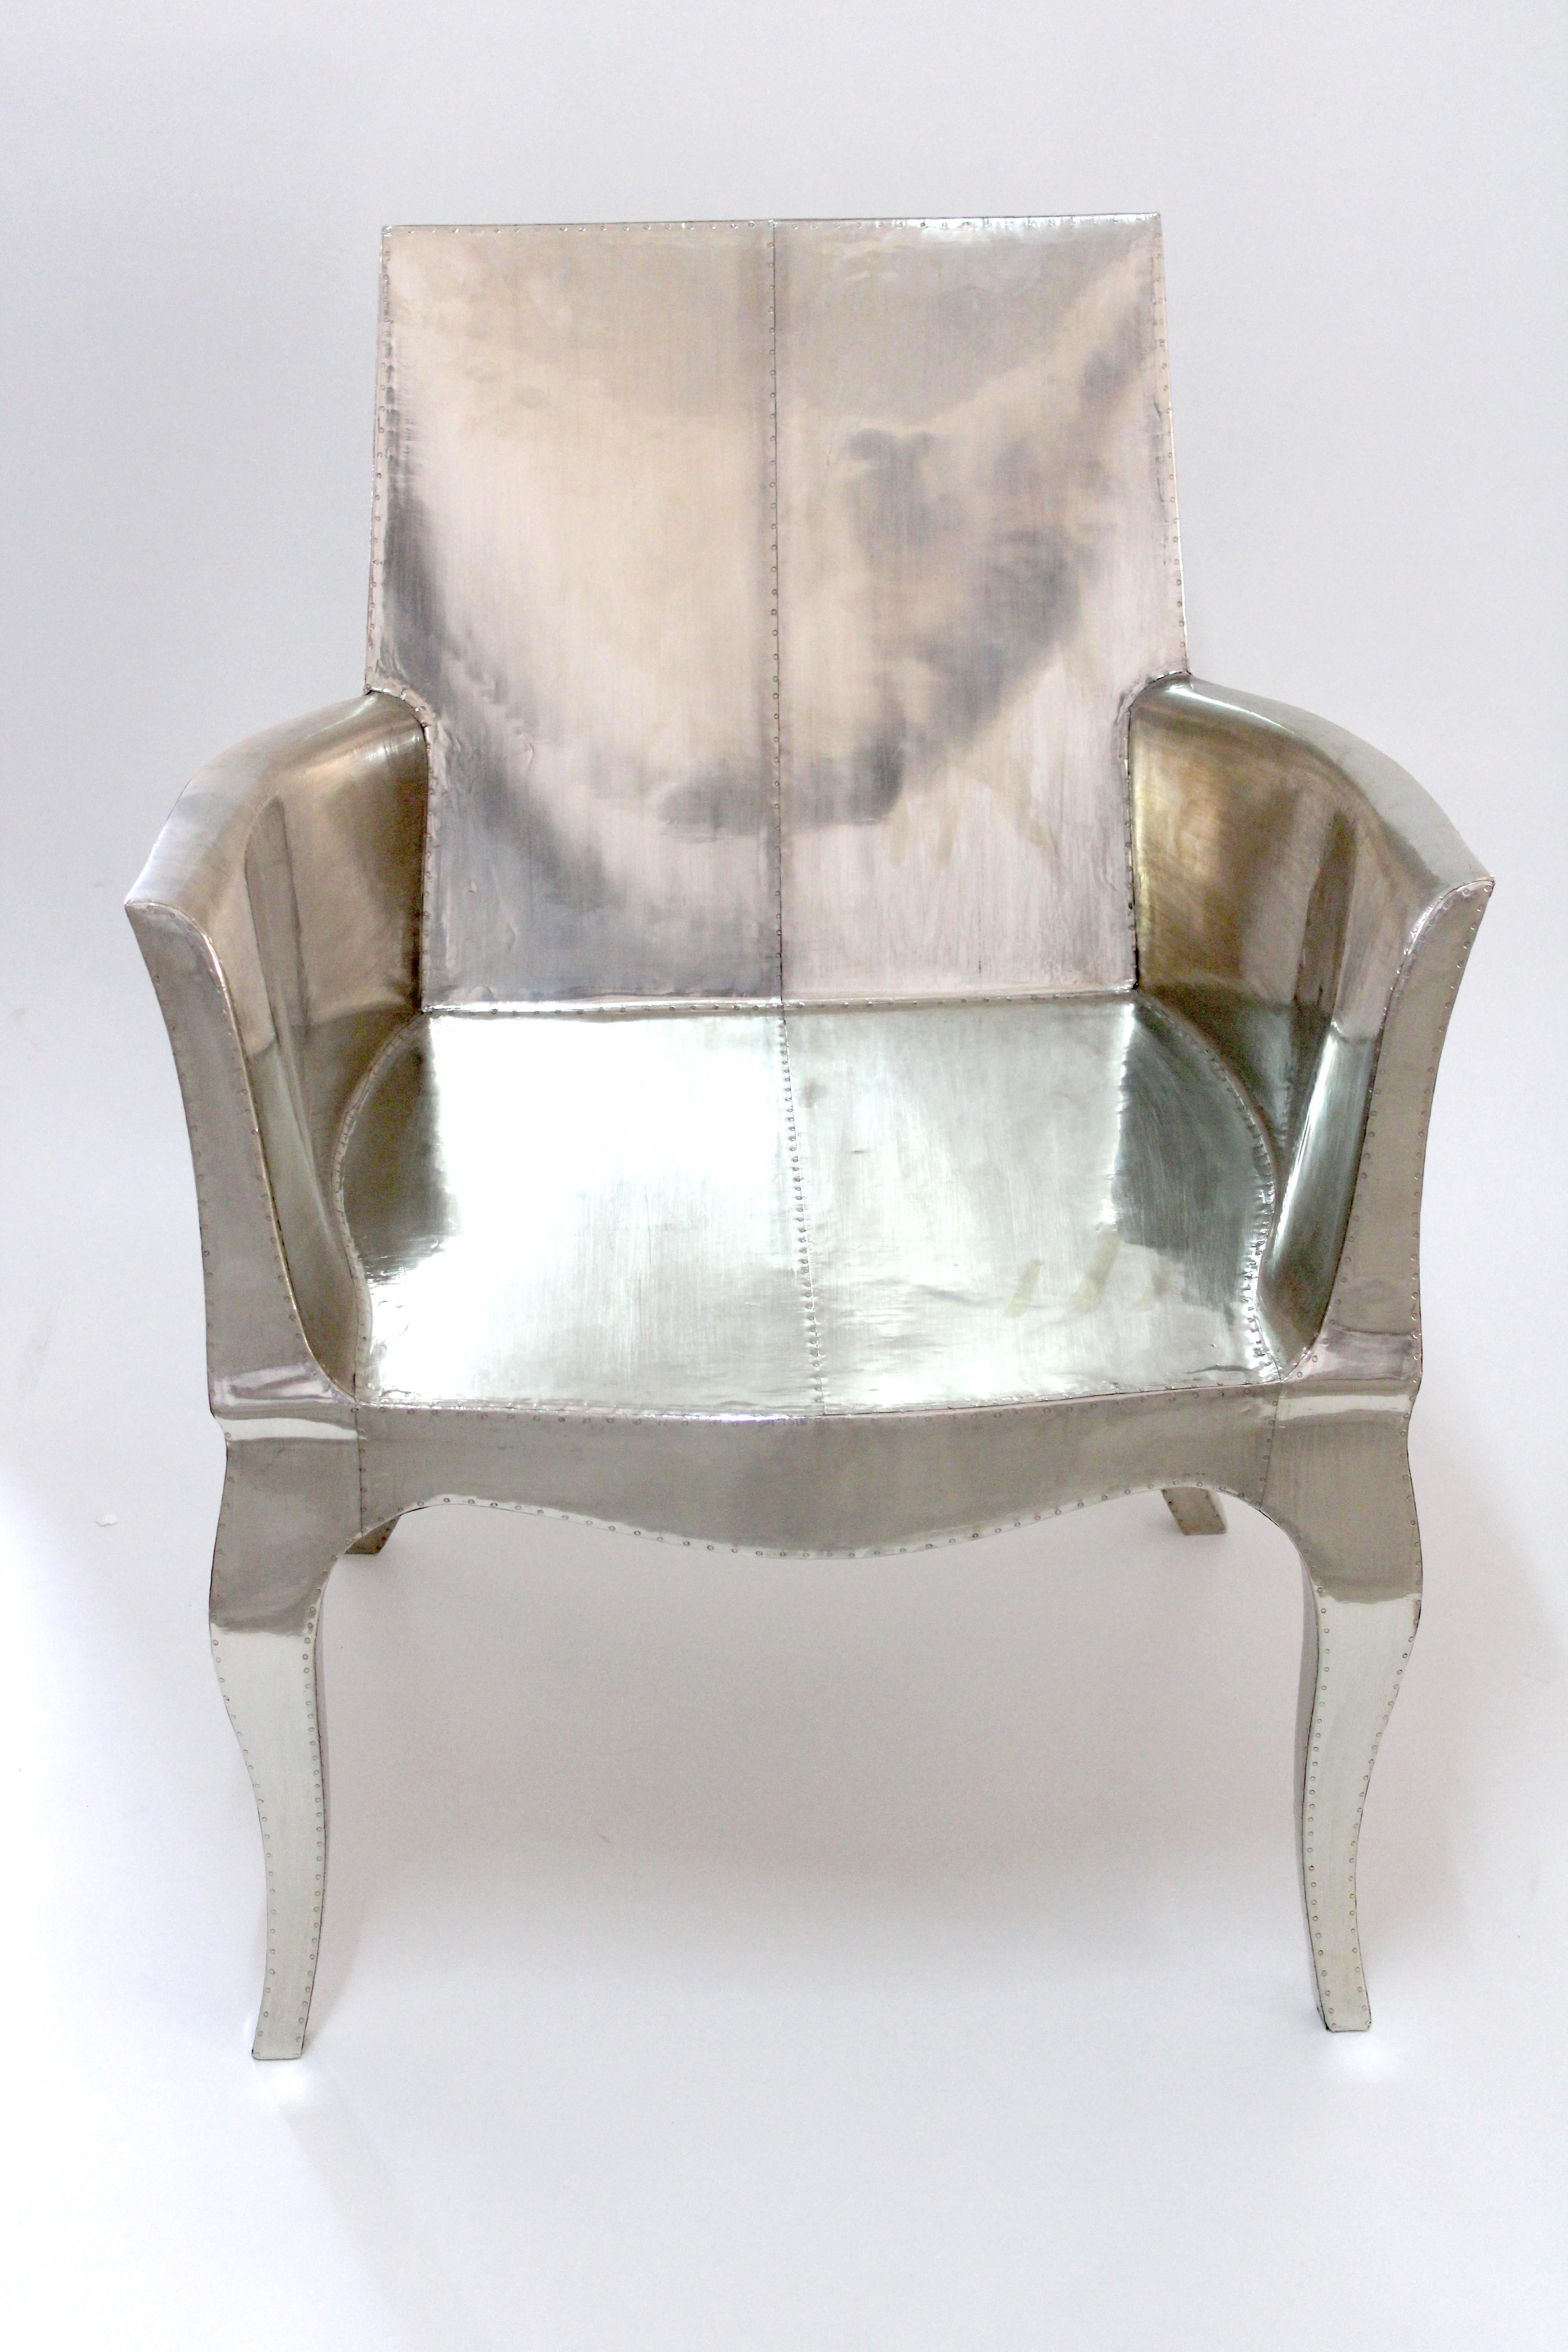 Art Deco Chairs in Smooth White Bronze by Paul Mathieu for S. Odegard For Sale 3